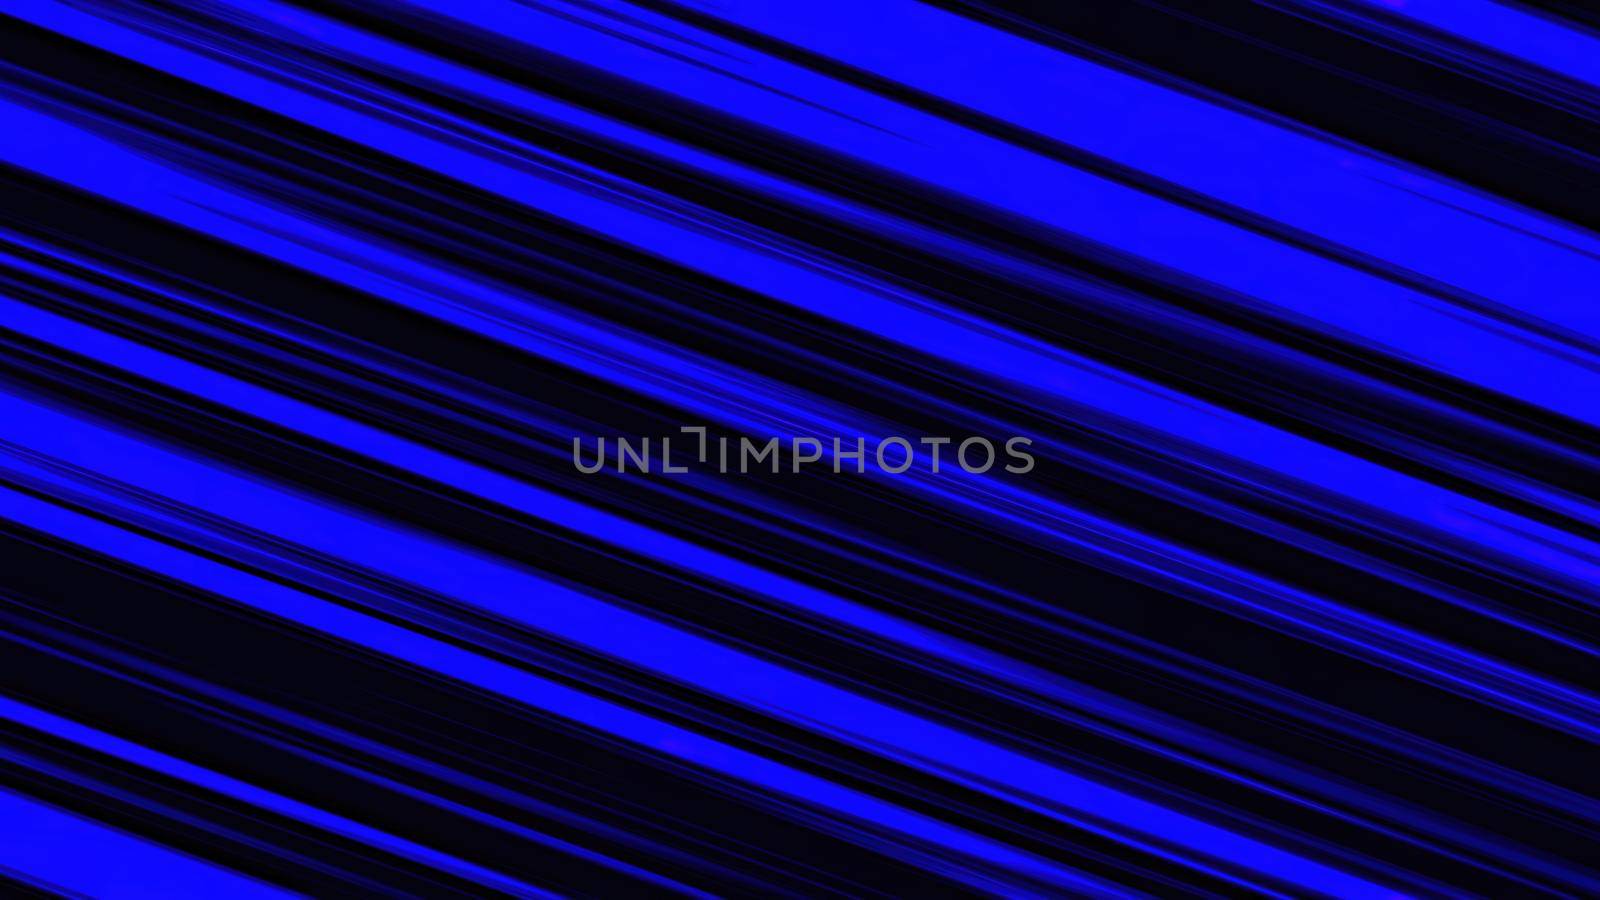 Blue and dark linear abstract background by cloudyew